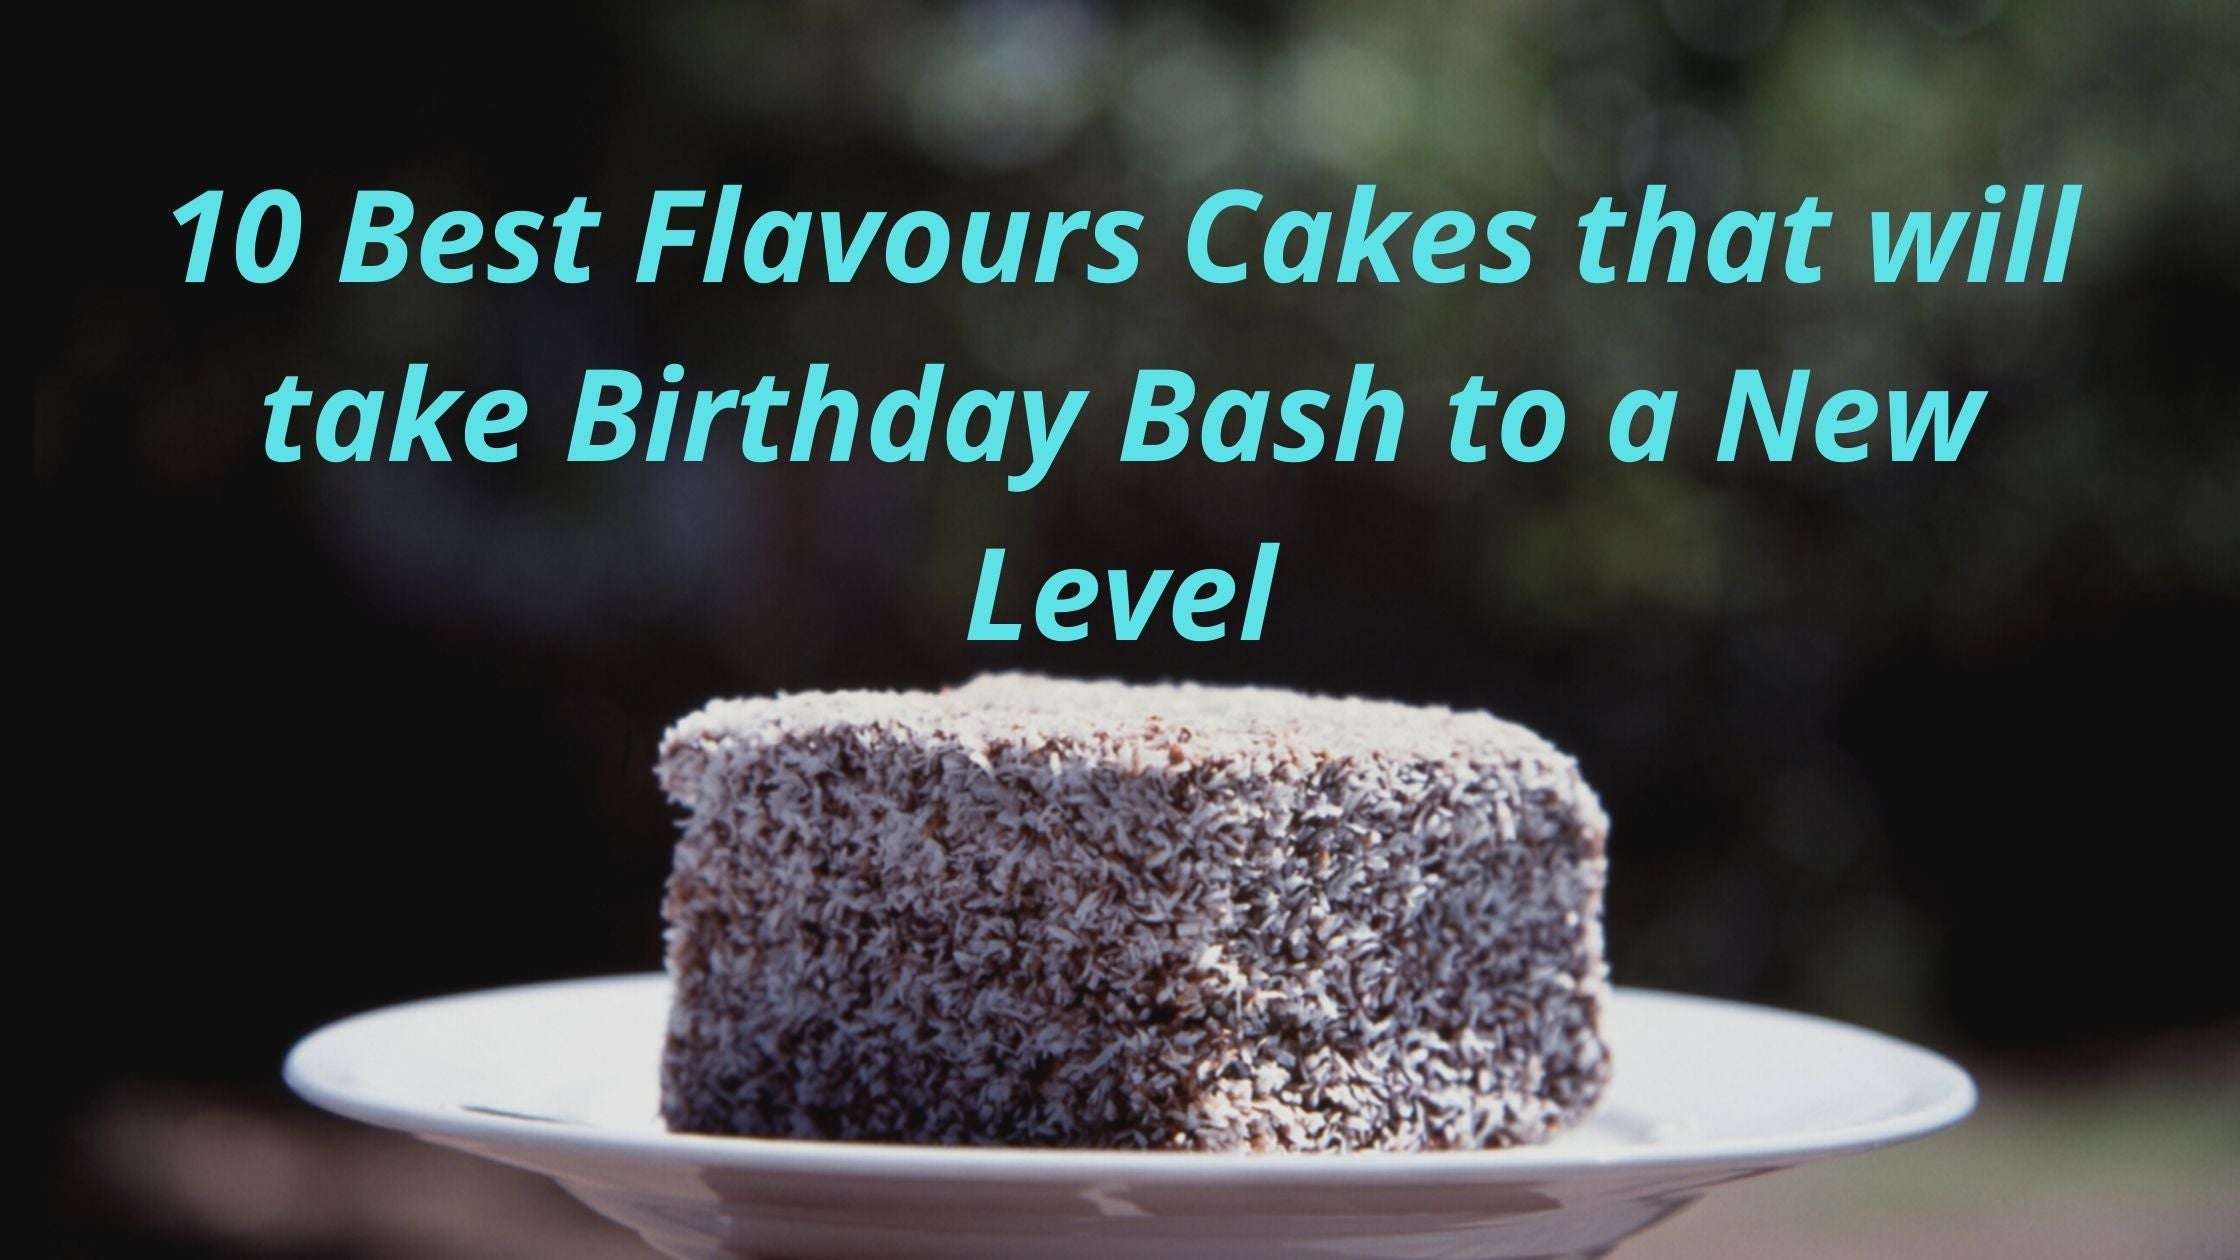 10 Best Flavours Cakes that will take Birthday Bash to a New Level